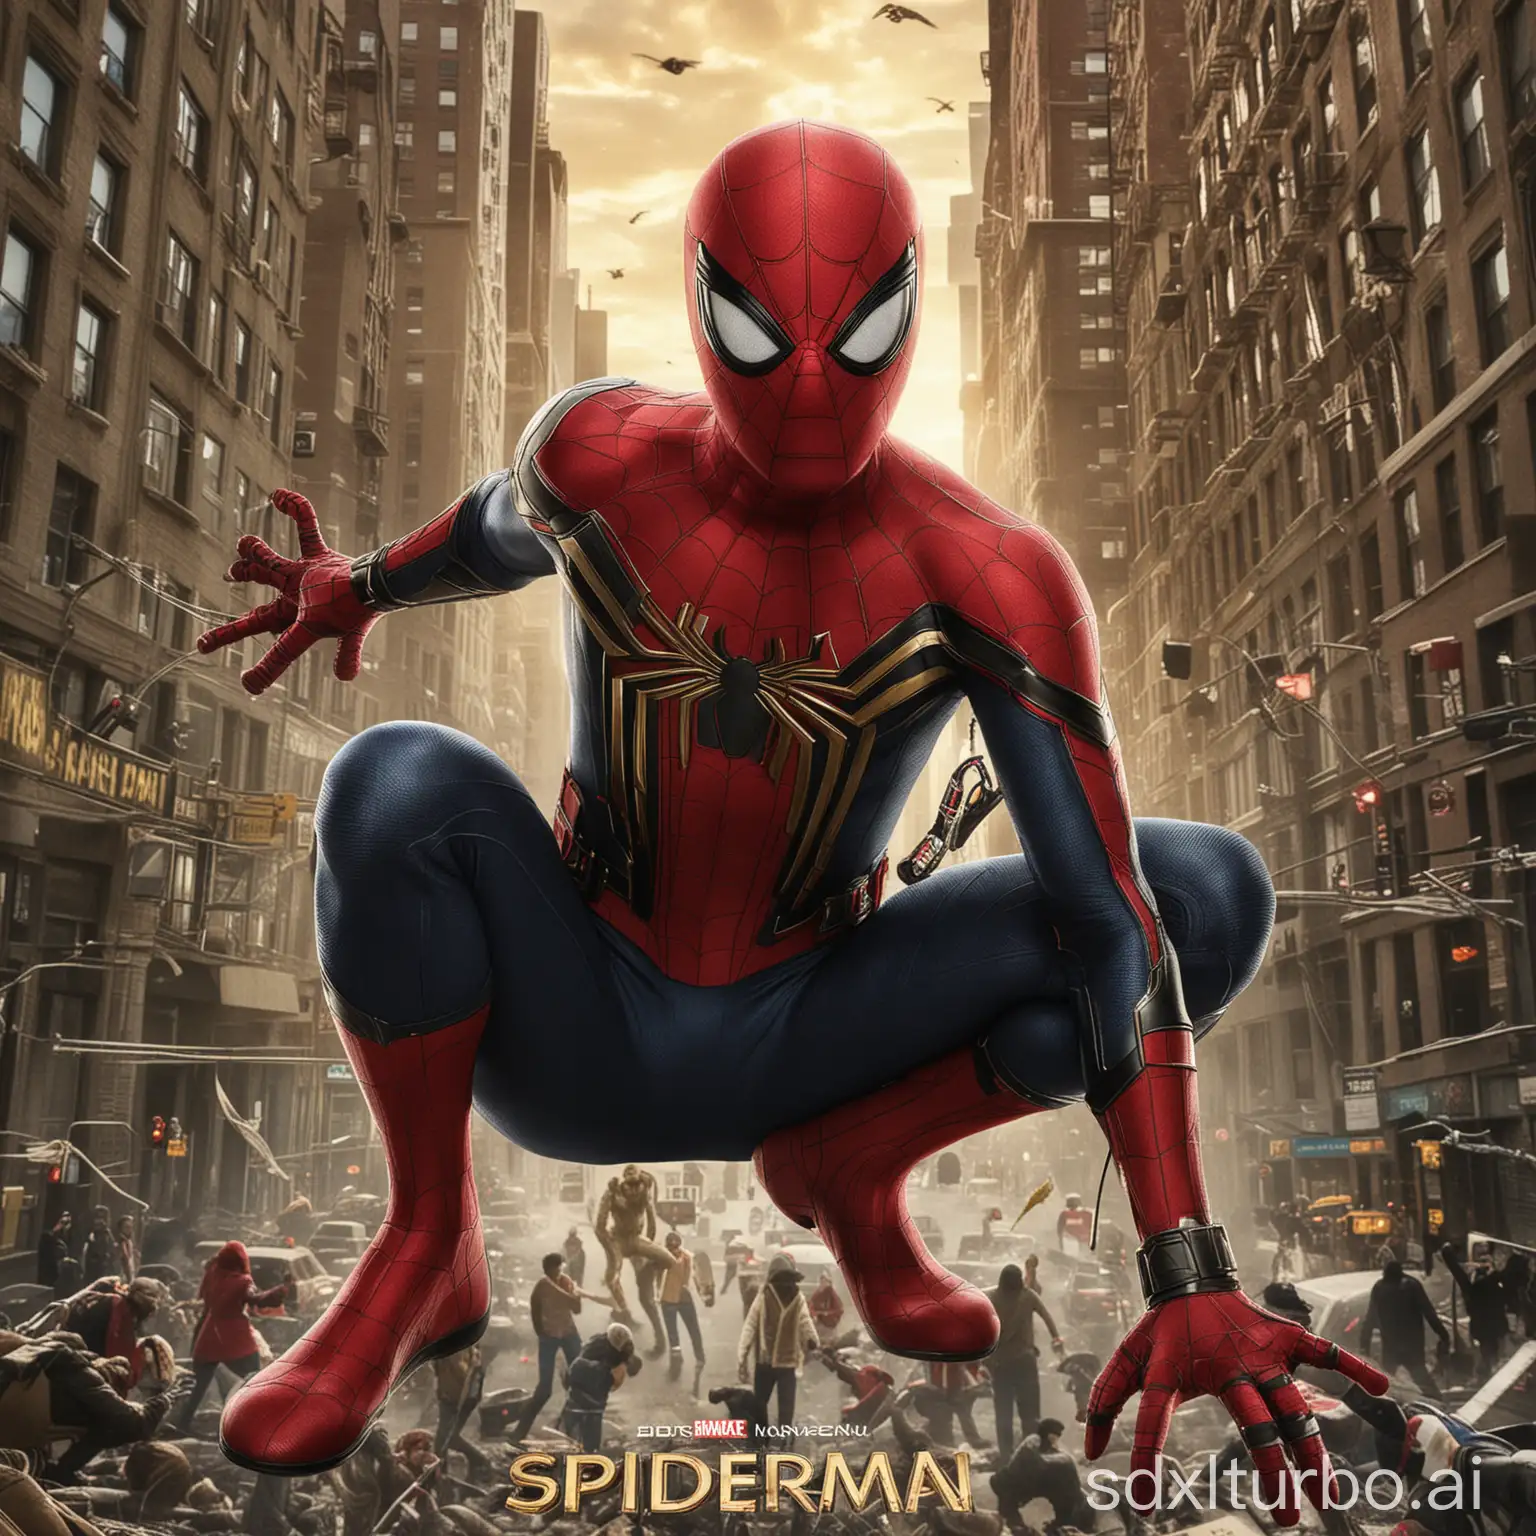 SpiderMan-No-Way-Home-Poster-Featuring-Heroes-in-Multiverse-Confrontation